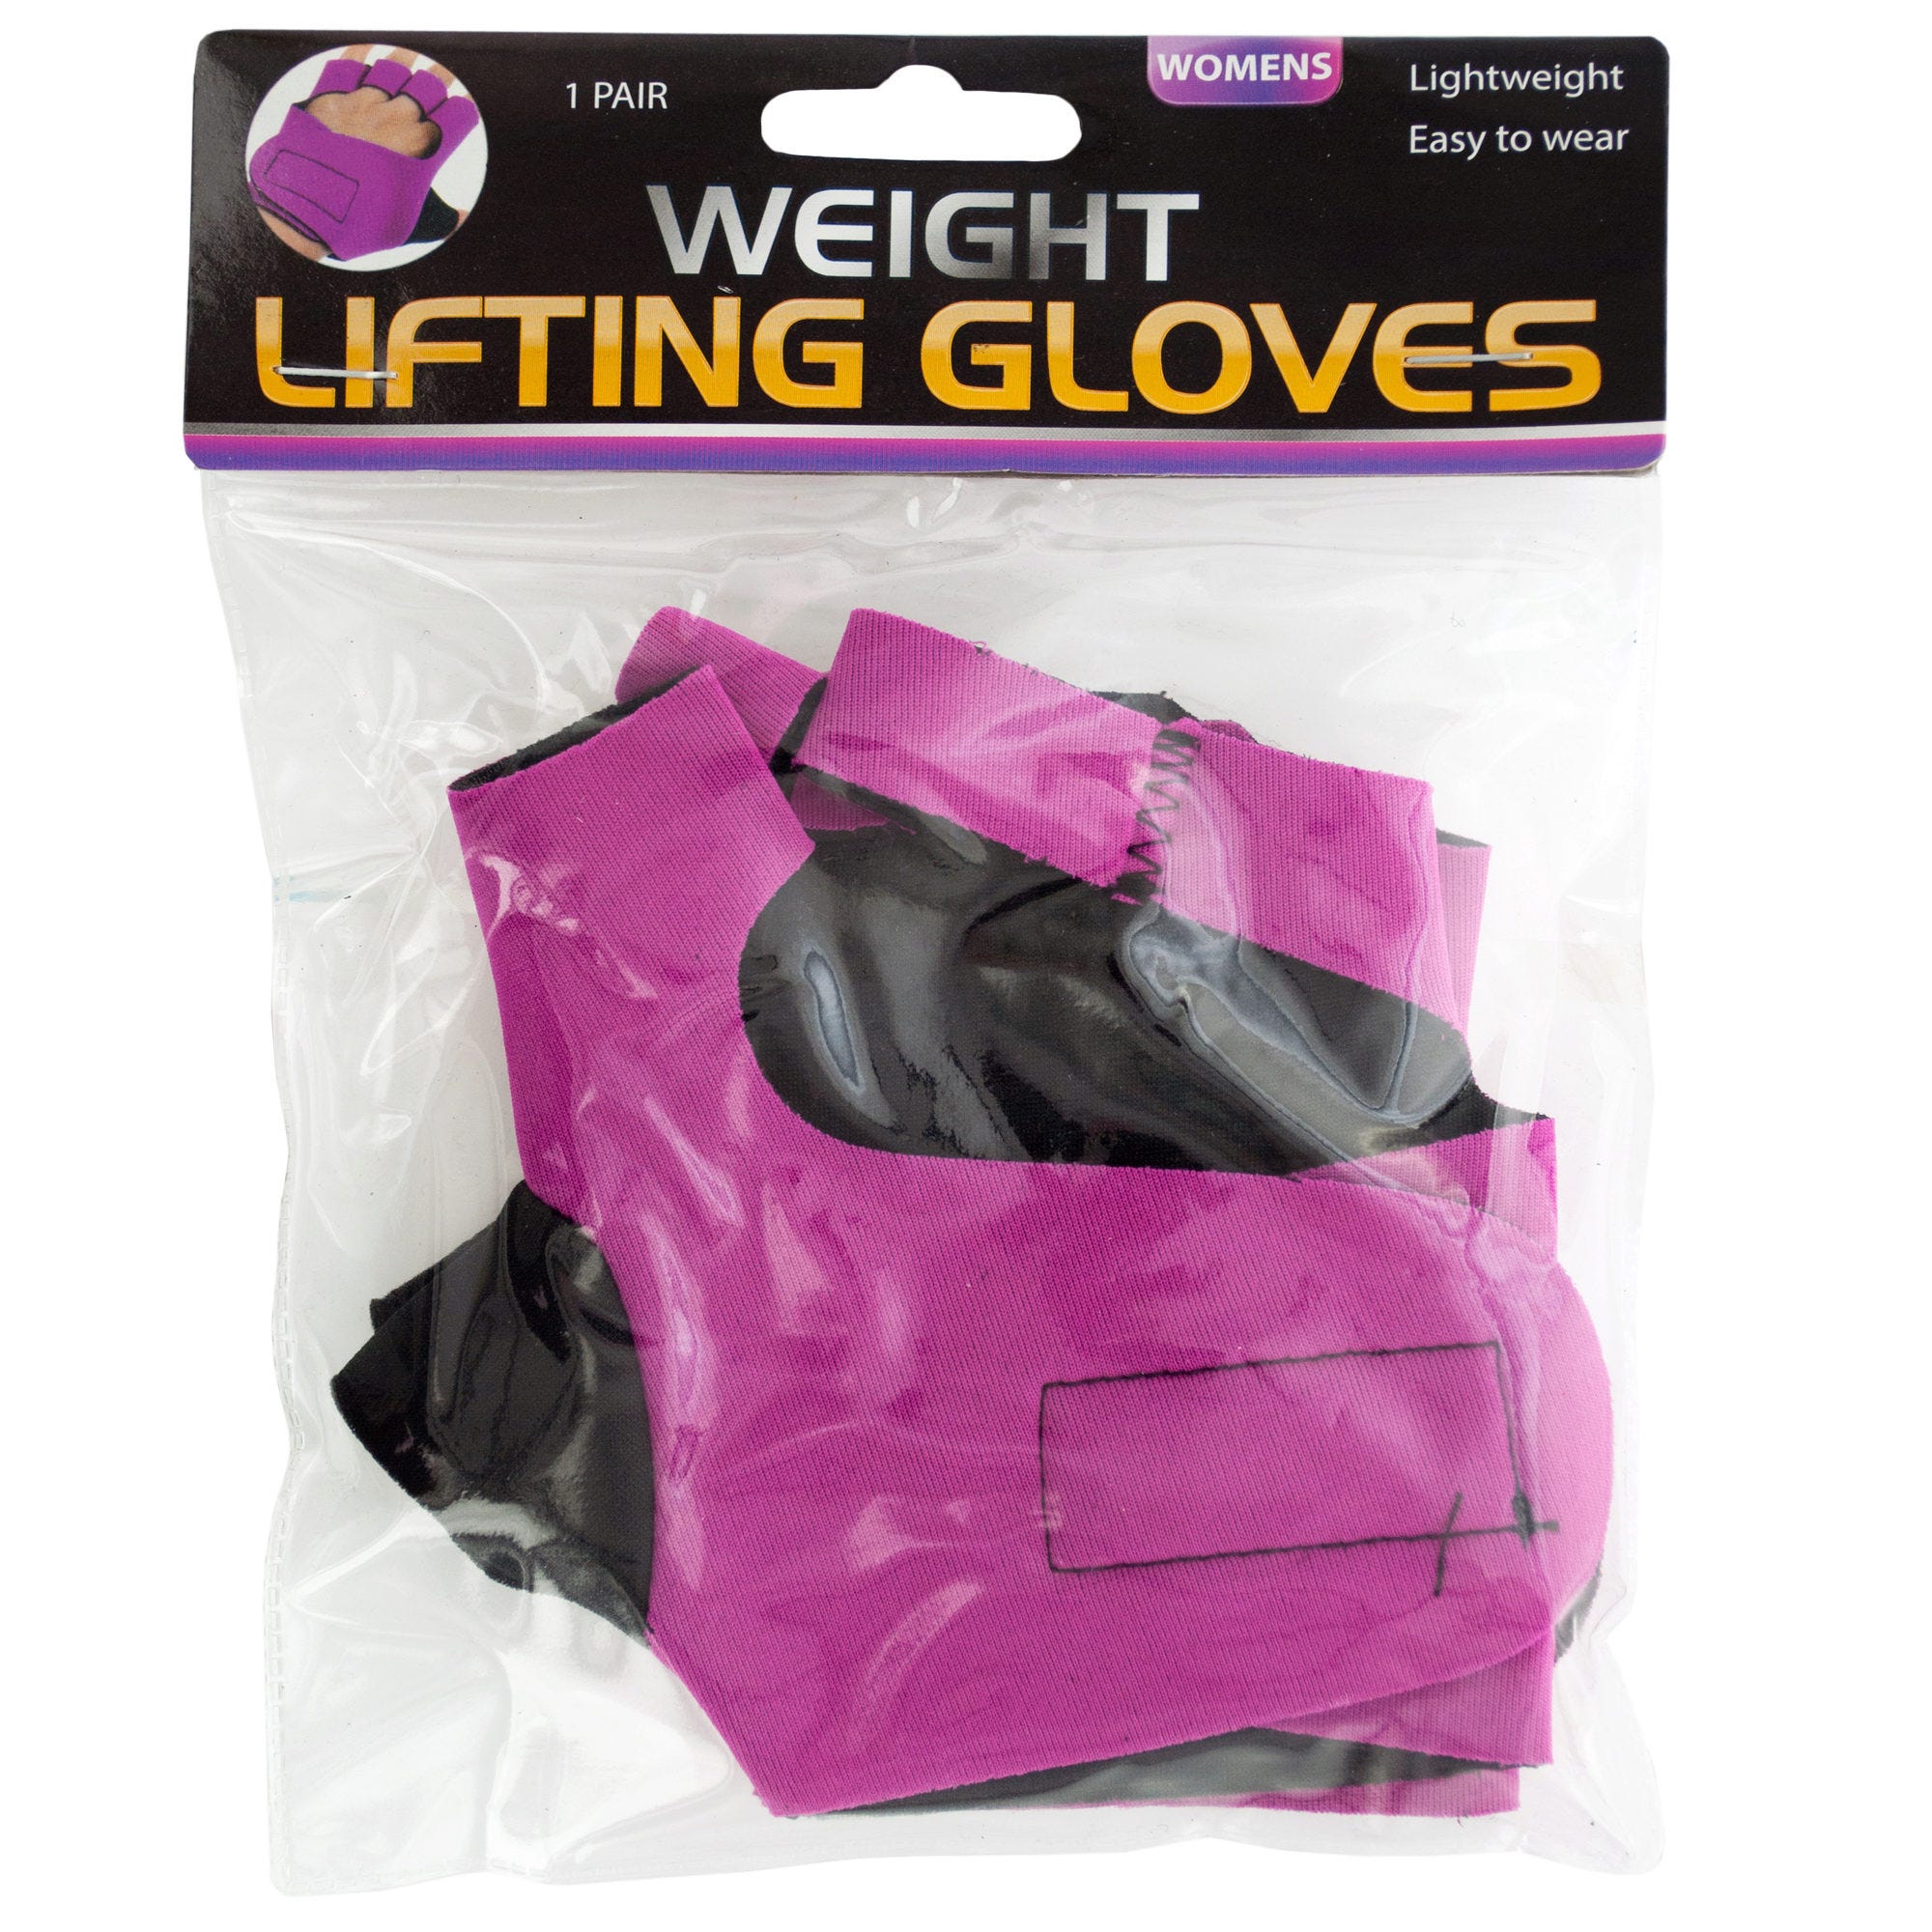 Women's Weight Lifting Gloves - Qty 12